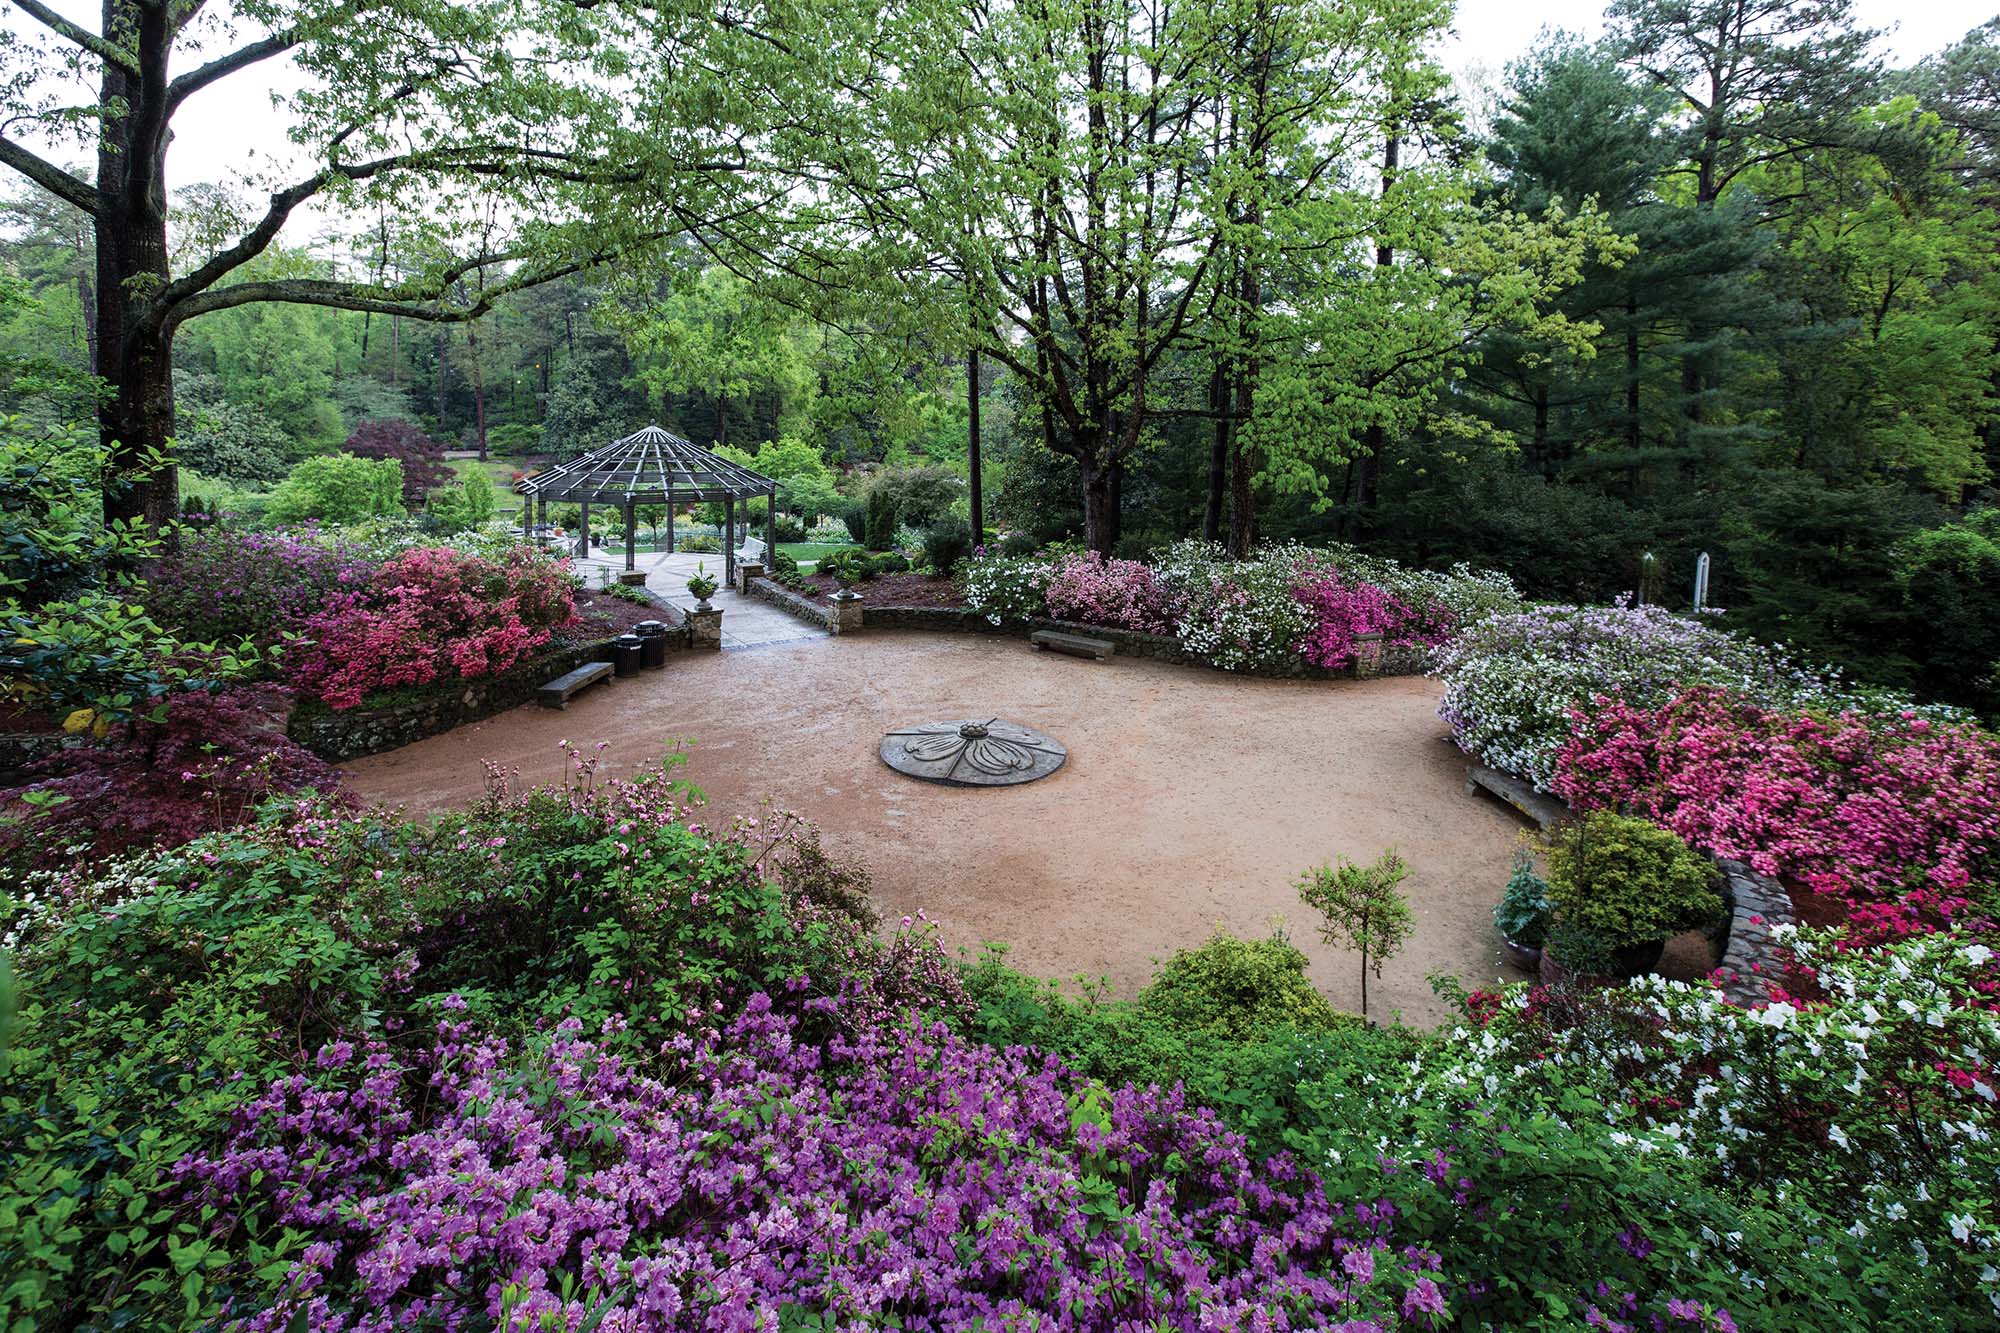 he Azalea Court blooming in the Historic Gardens. Photo by Rick Fisher.